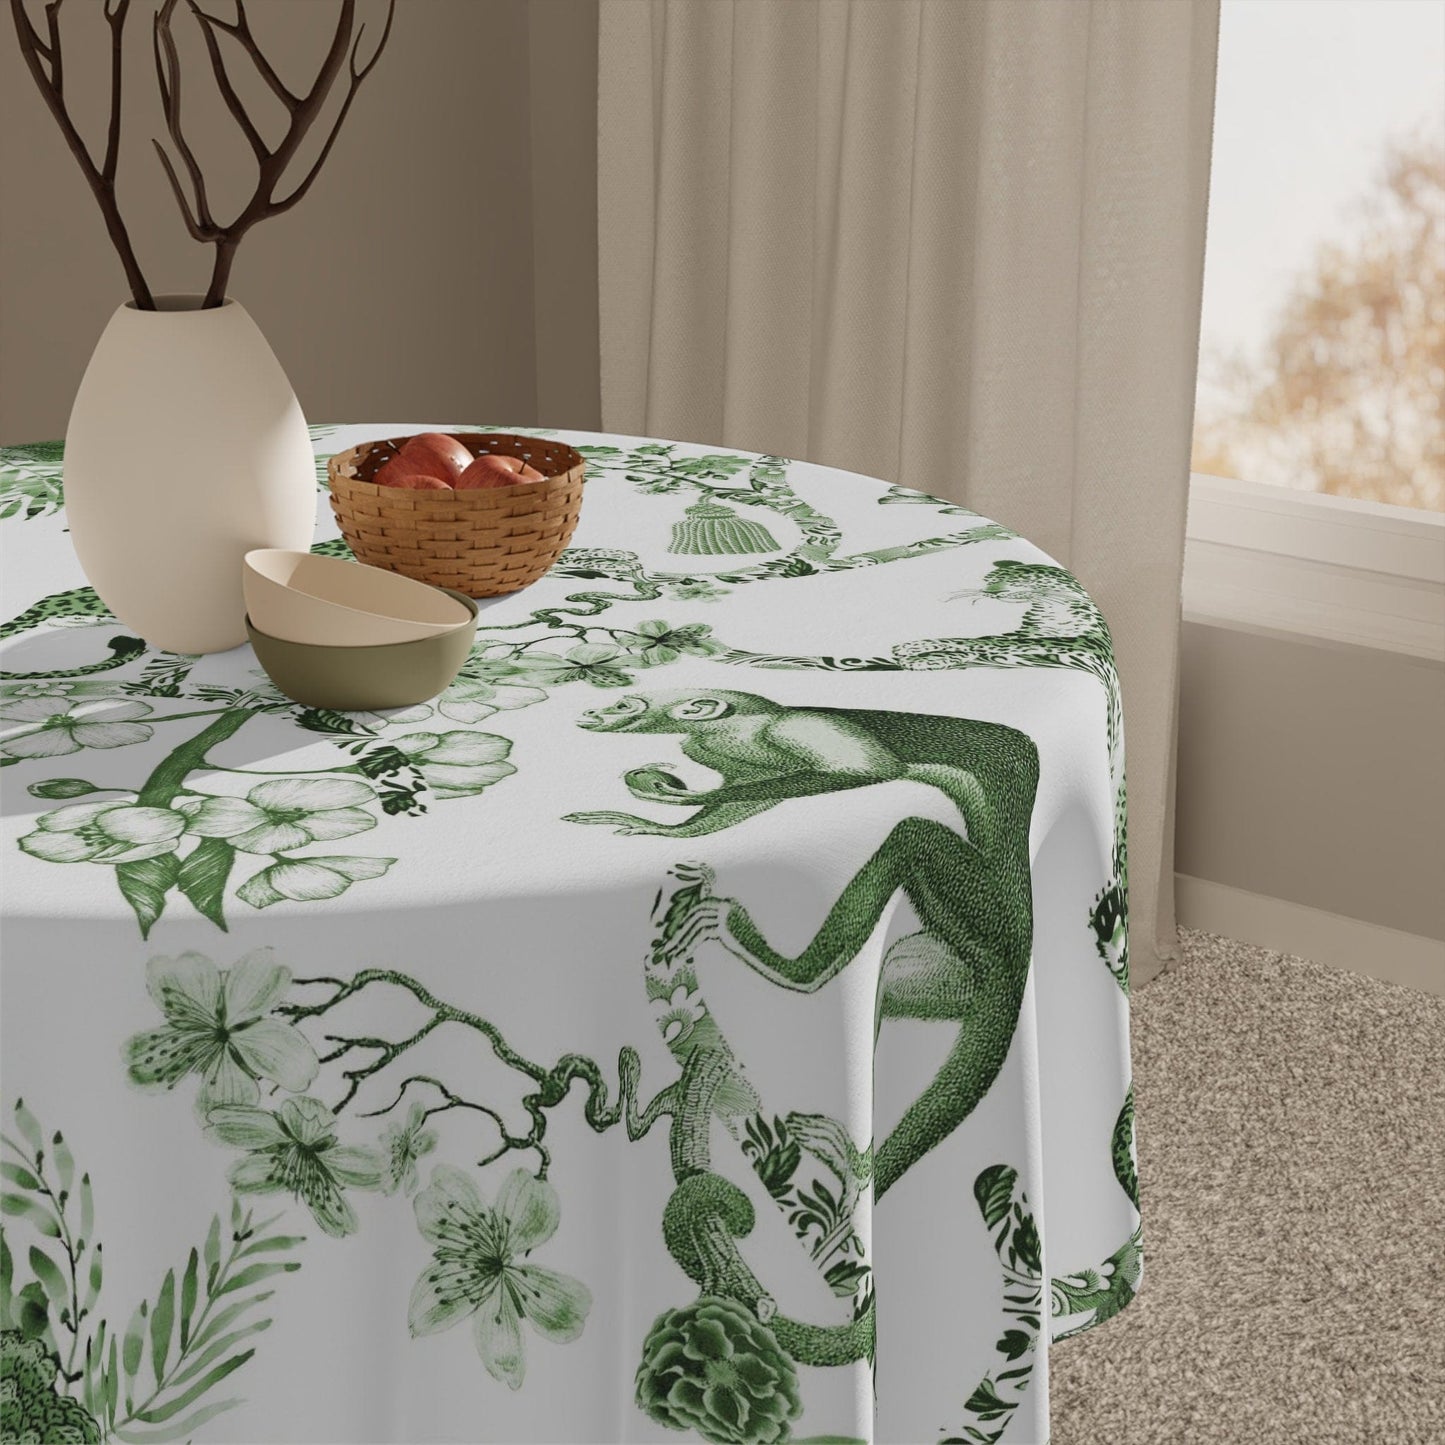 Kate McEnroe New York Chinoiserie Botanical Toile Tablecloth, Floral Green, White Chinoiserie Jungle, Country Farmhouse Table Decor, Grandmillenial Kitchen Decor Tablecloths 20990366732955140771